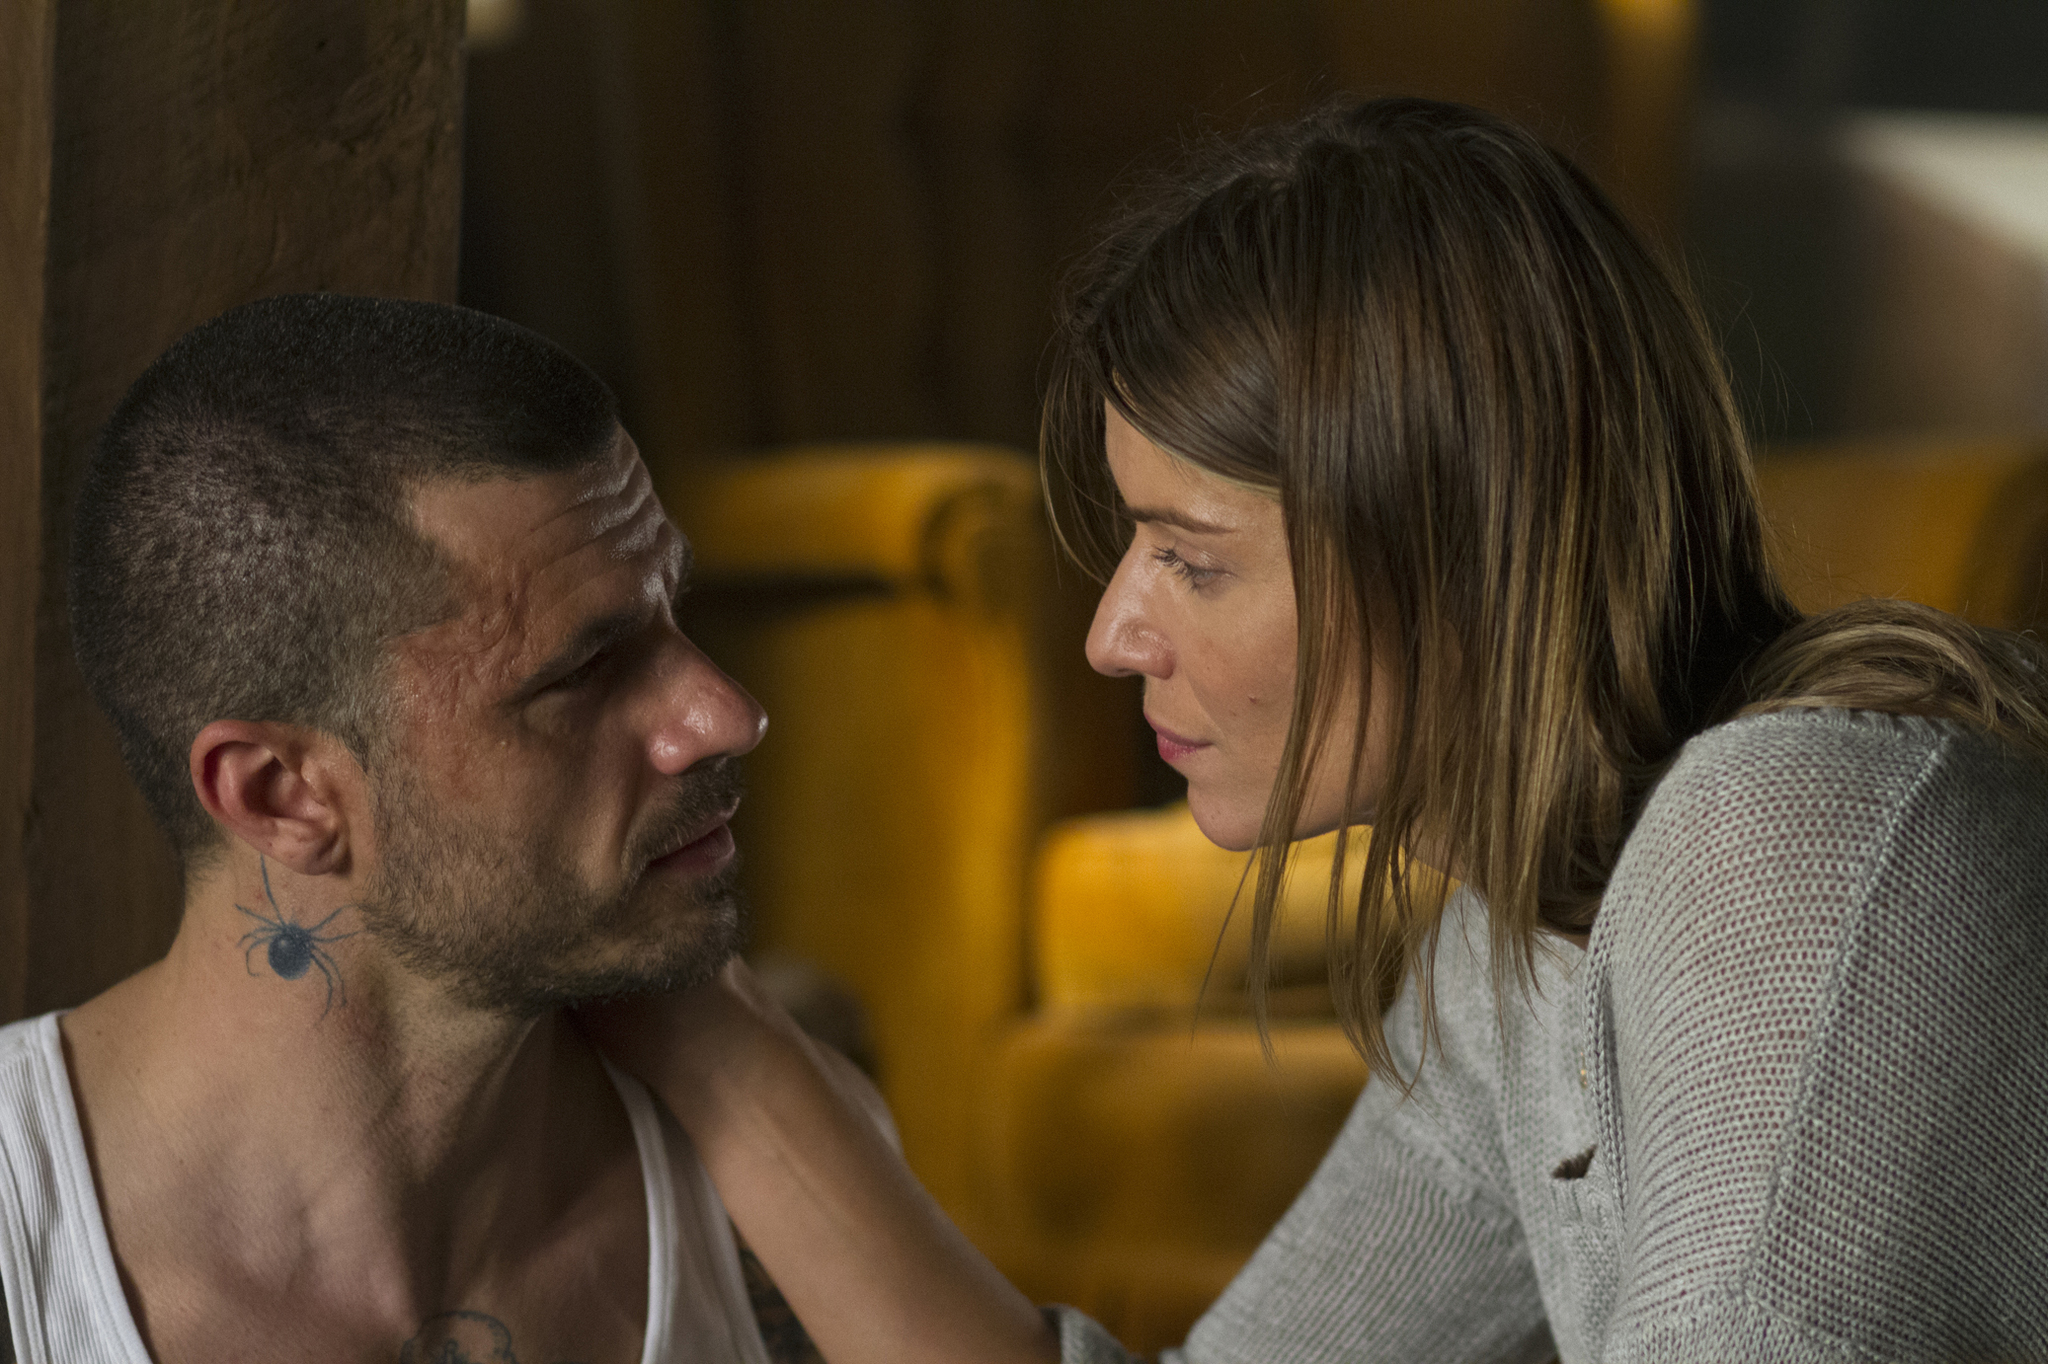 Still of Ivana Milicevic and Christos Vasilopoulos in Banshee (2013)